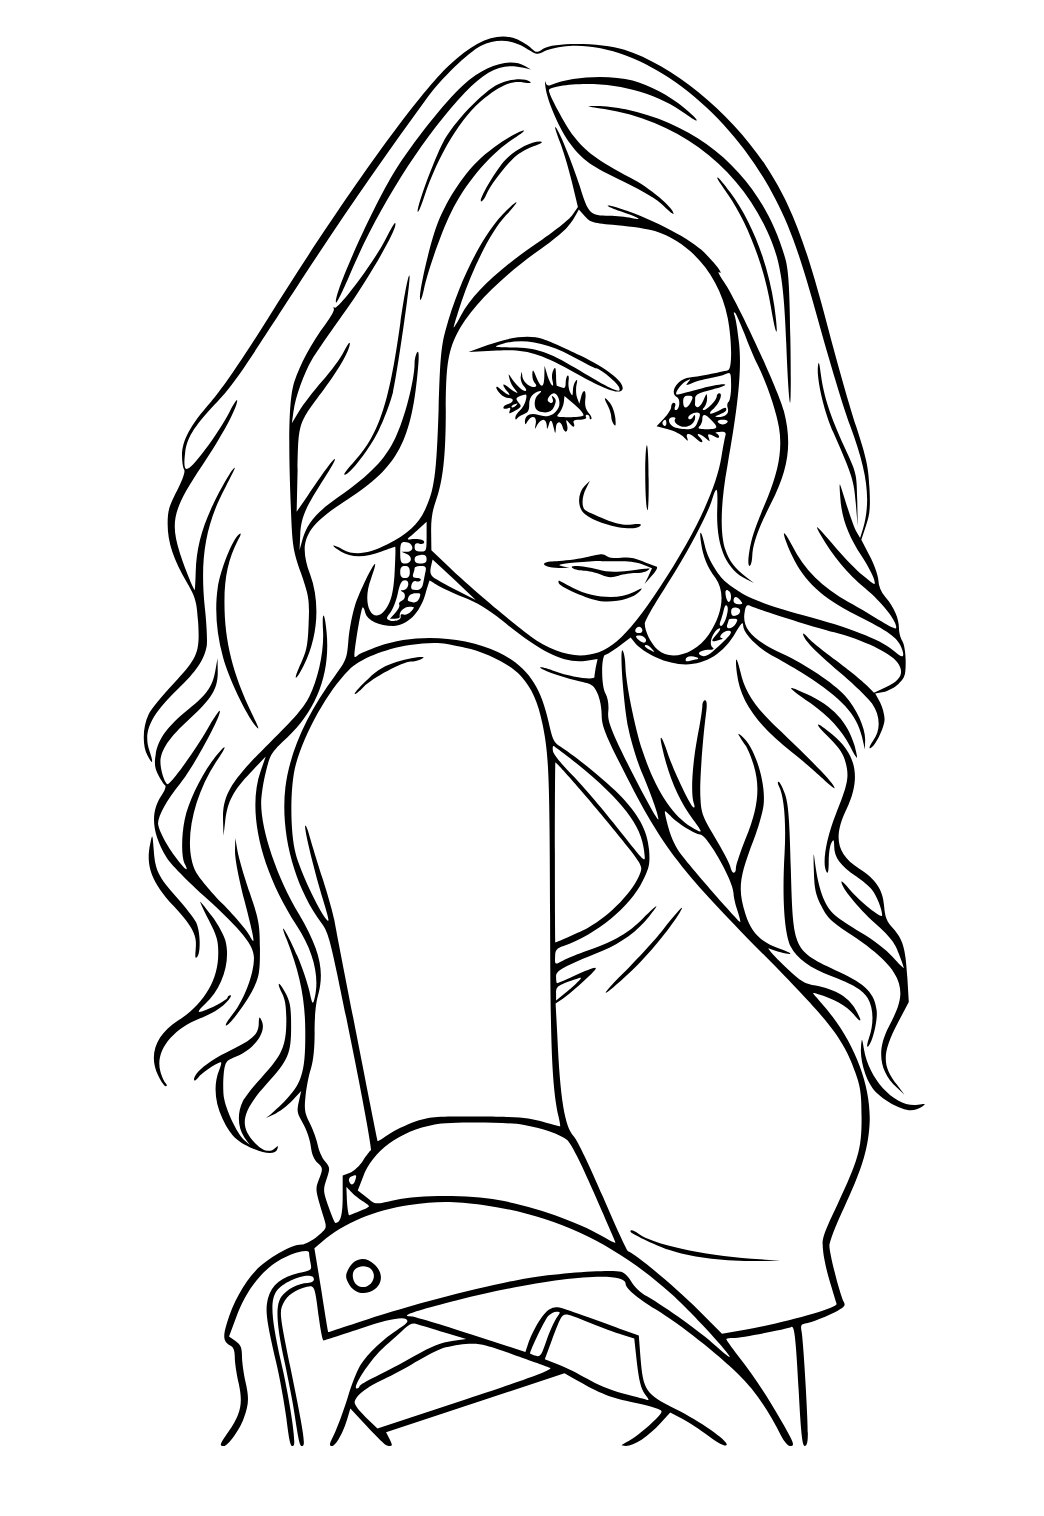 Free Printable Ariana Grande Gorgeous Coloring Page for Adults and Kids ...